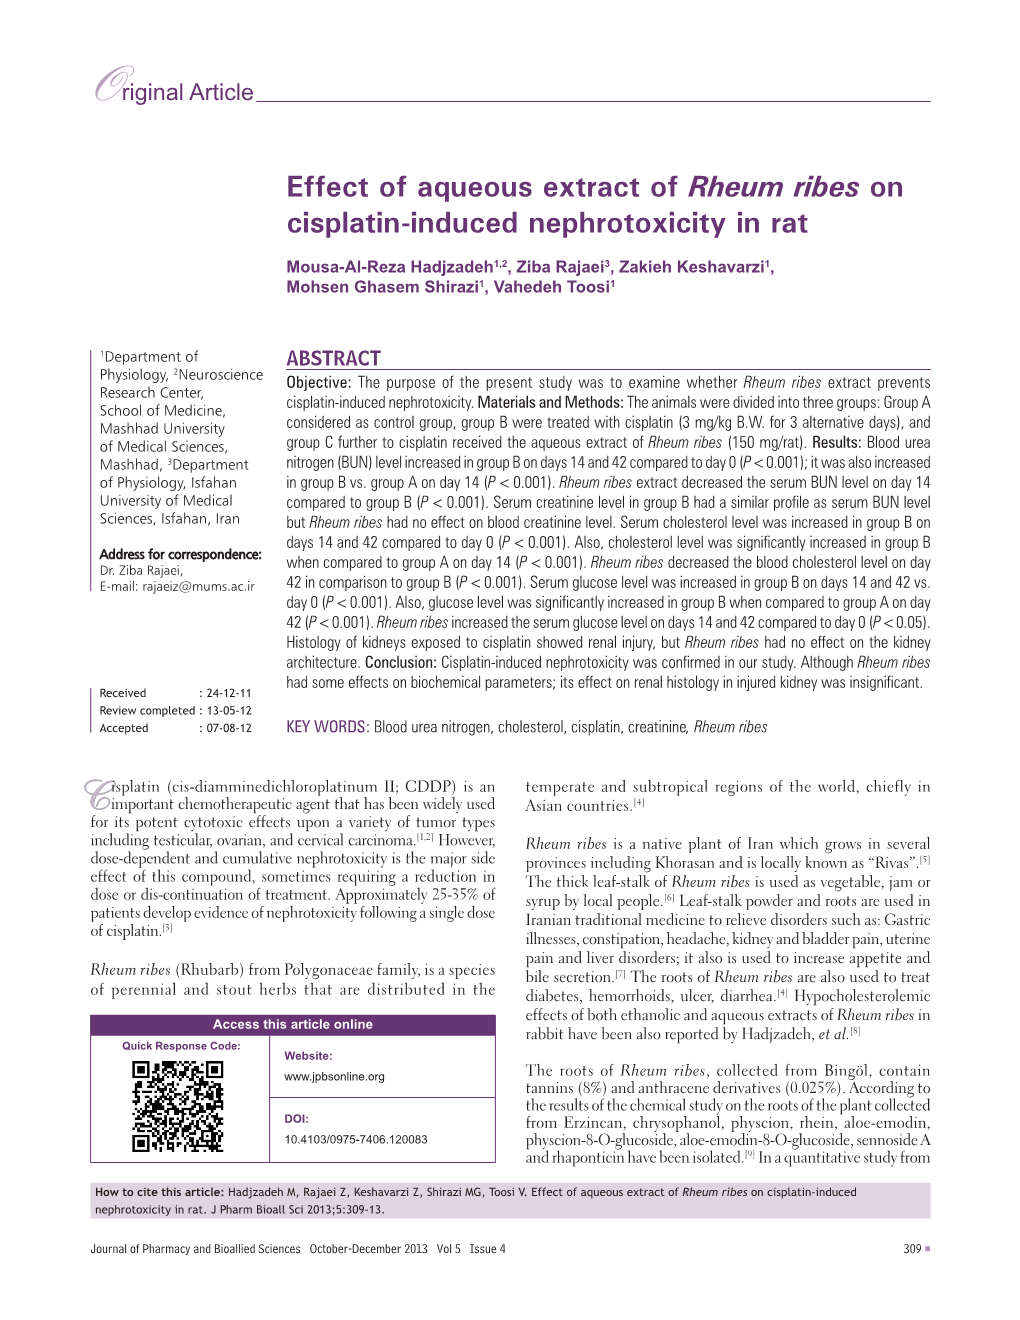 Effect of Aqueous Extract of Rheum Ribes on Cisplatin‑Induced Nephrotoxicity in Rat